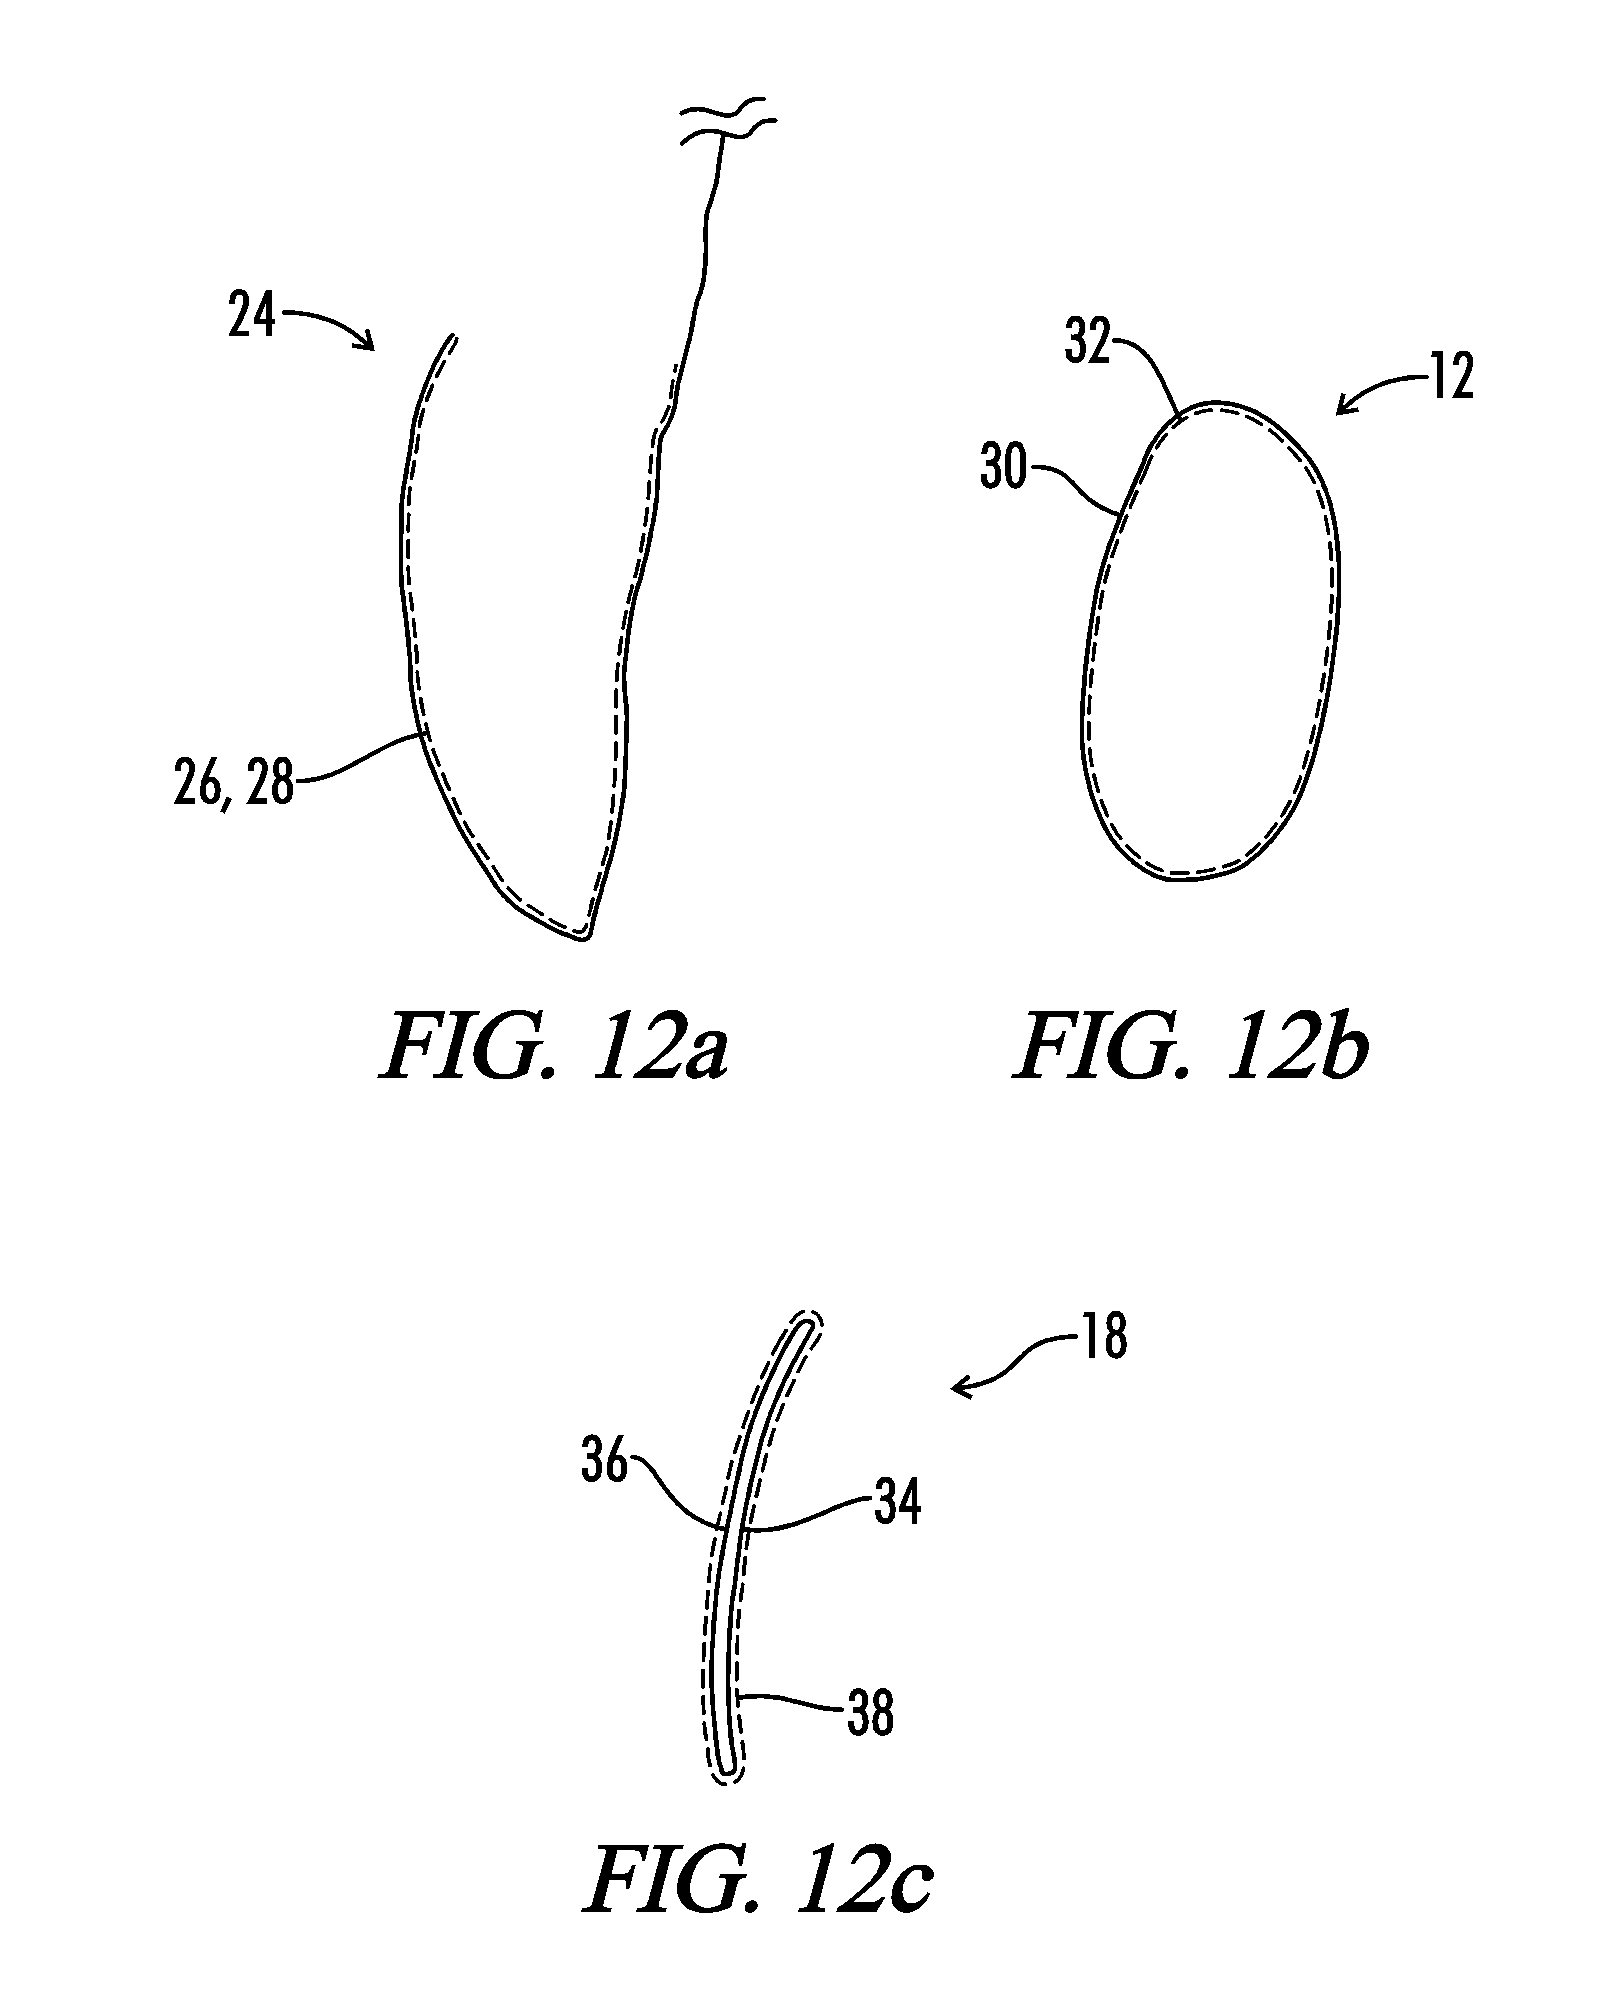 Interfaced medical implant assembly